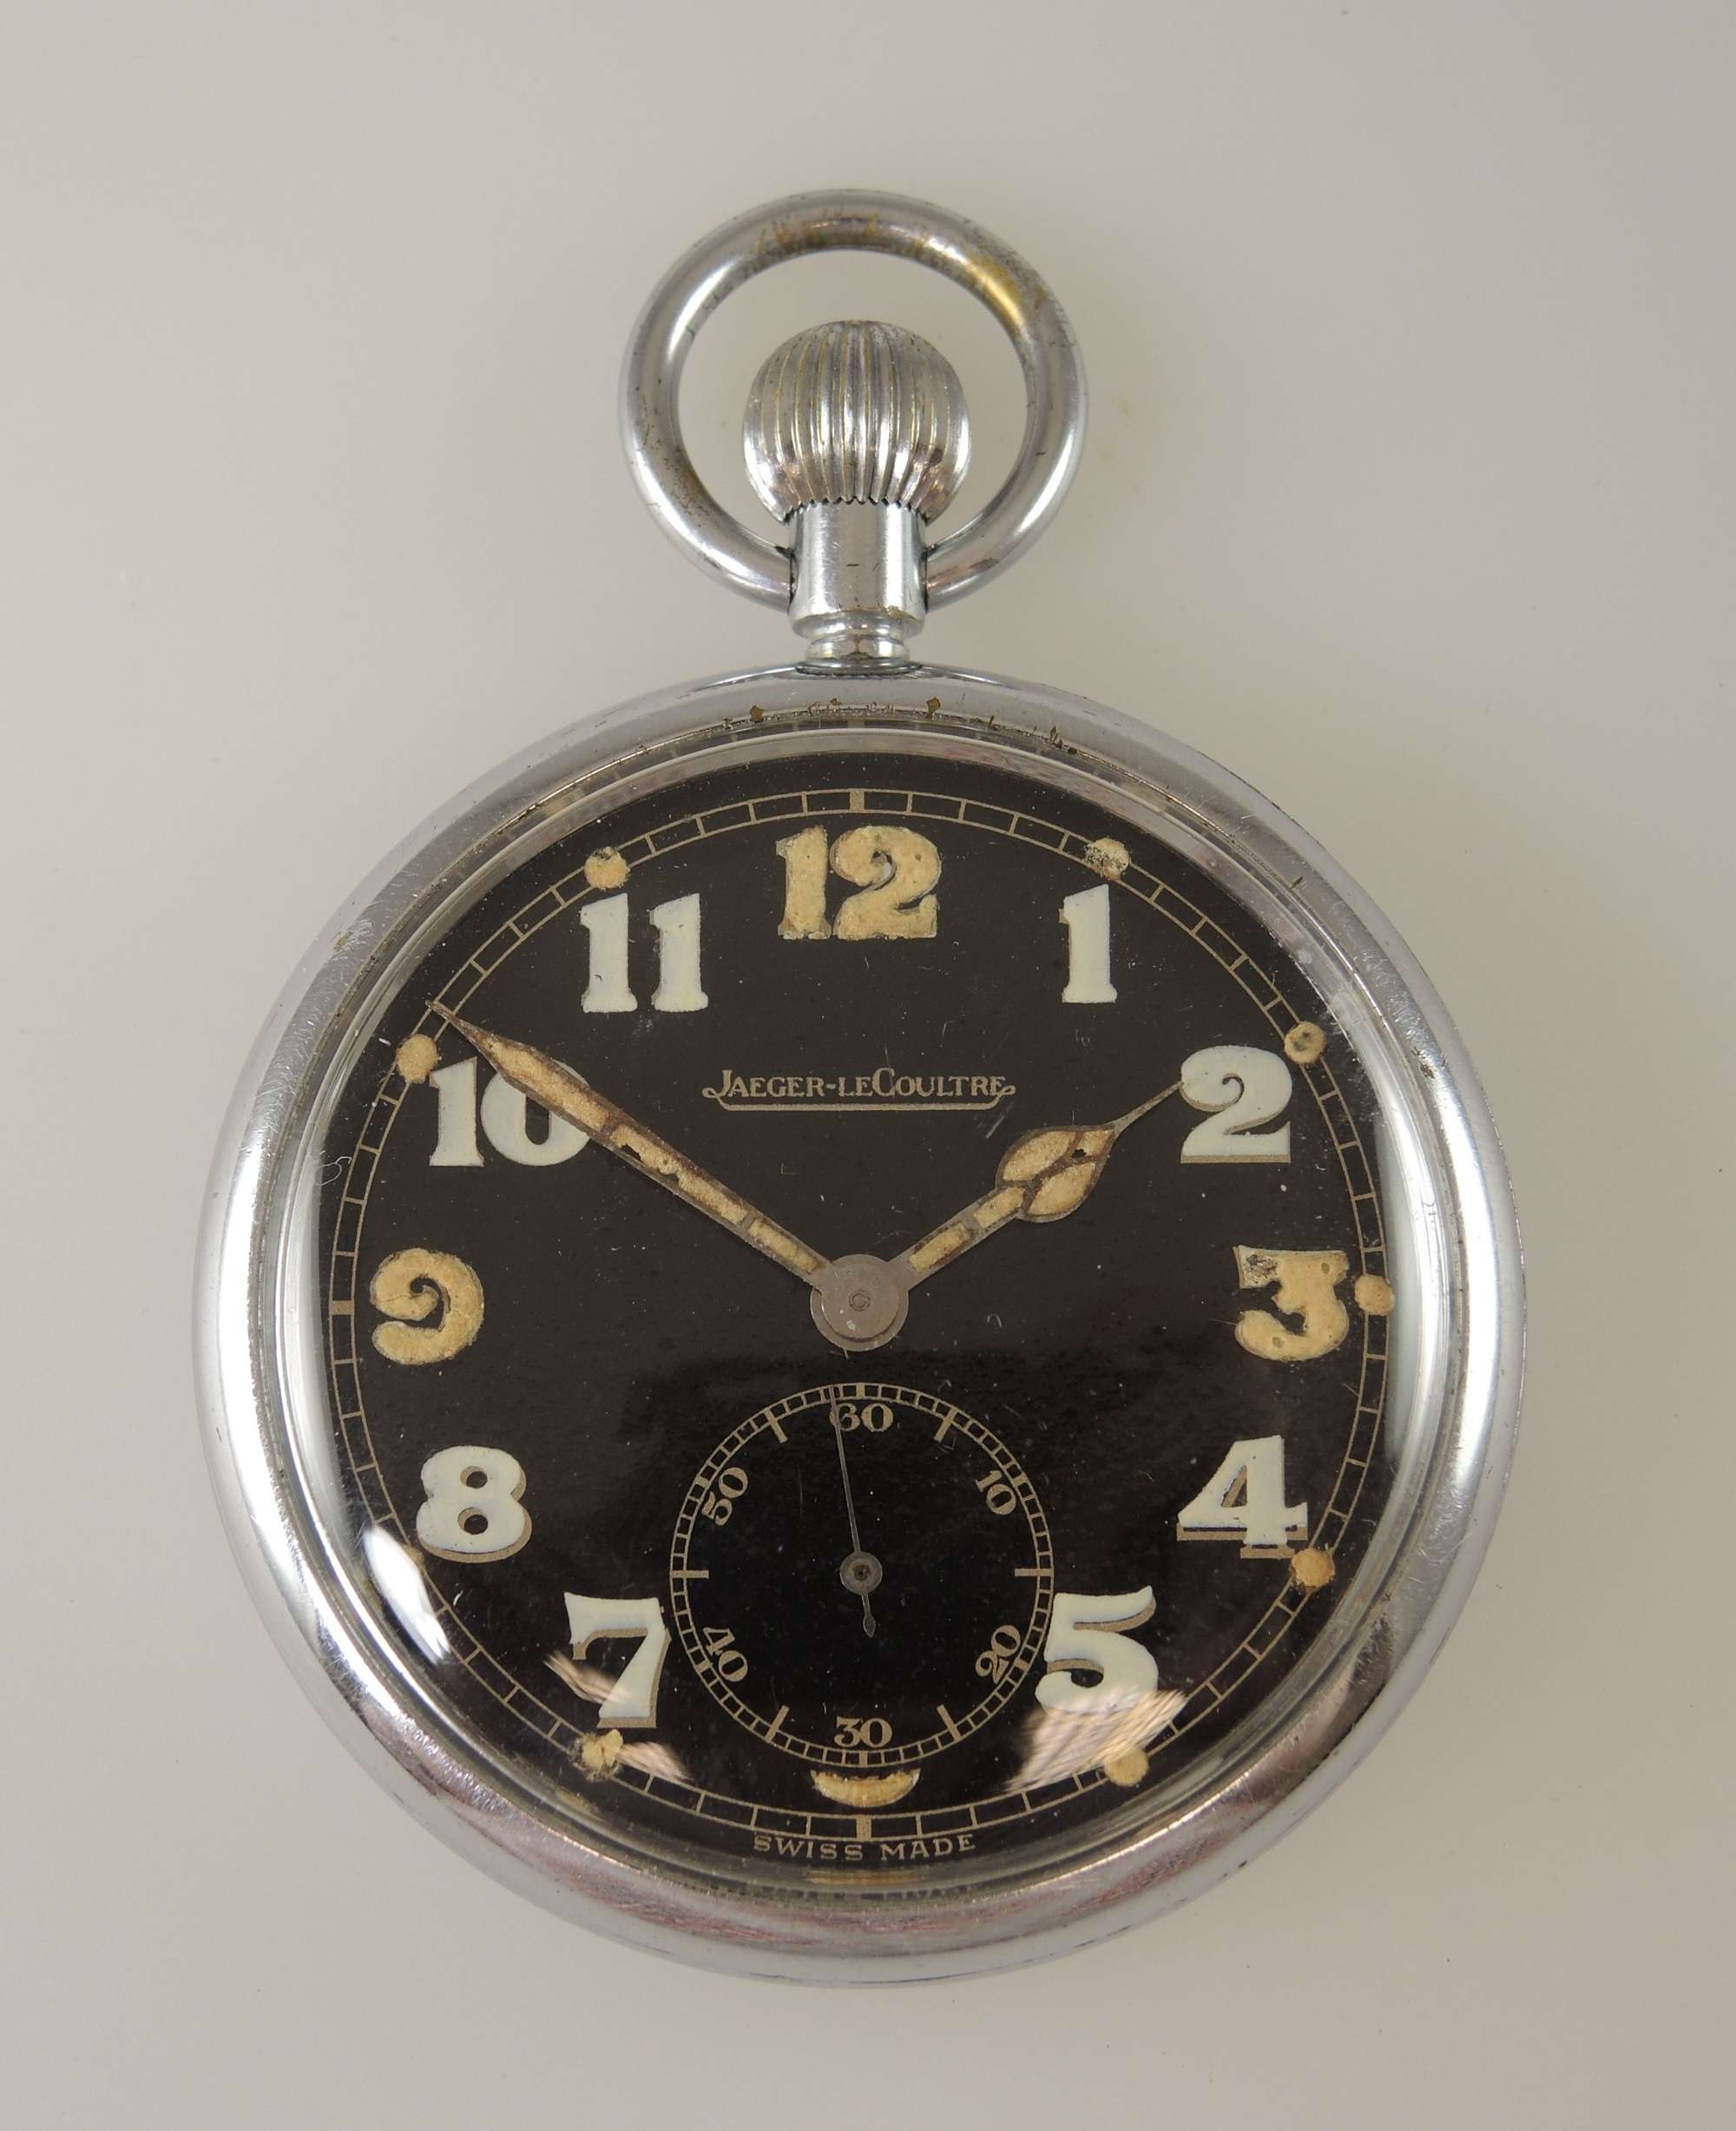 Jaeger-Le-Coultre military pocket watch c1940